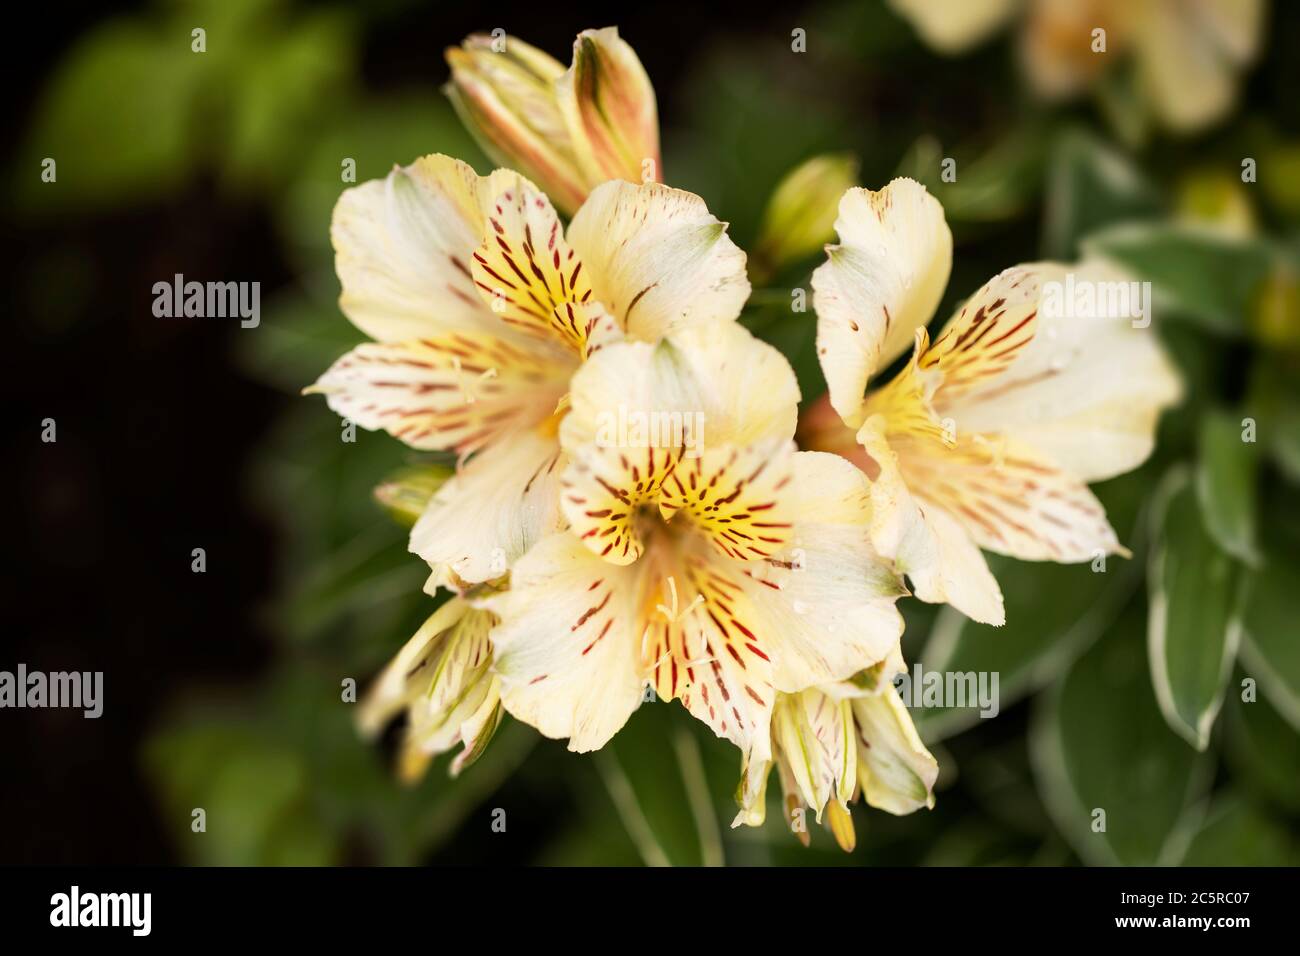 A pale yellow Peruvian lily (Alstroemeria) in variety Fabiana, family Alstroemeriaceae, growing in a summer garden. Stock Photo